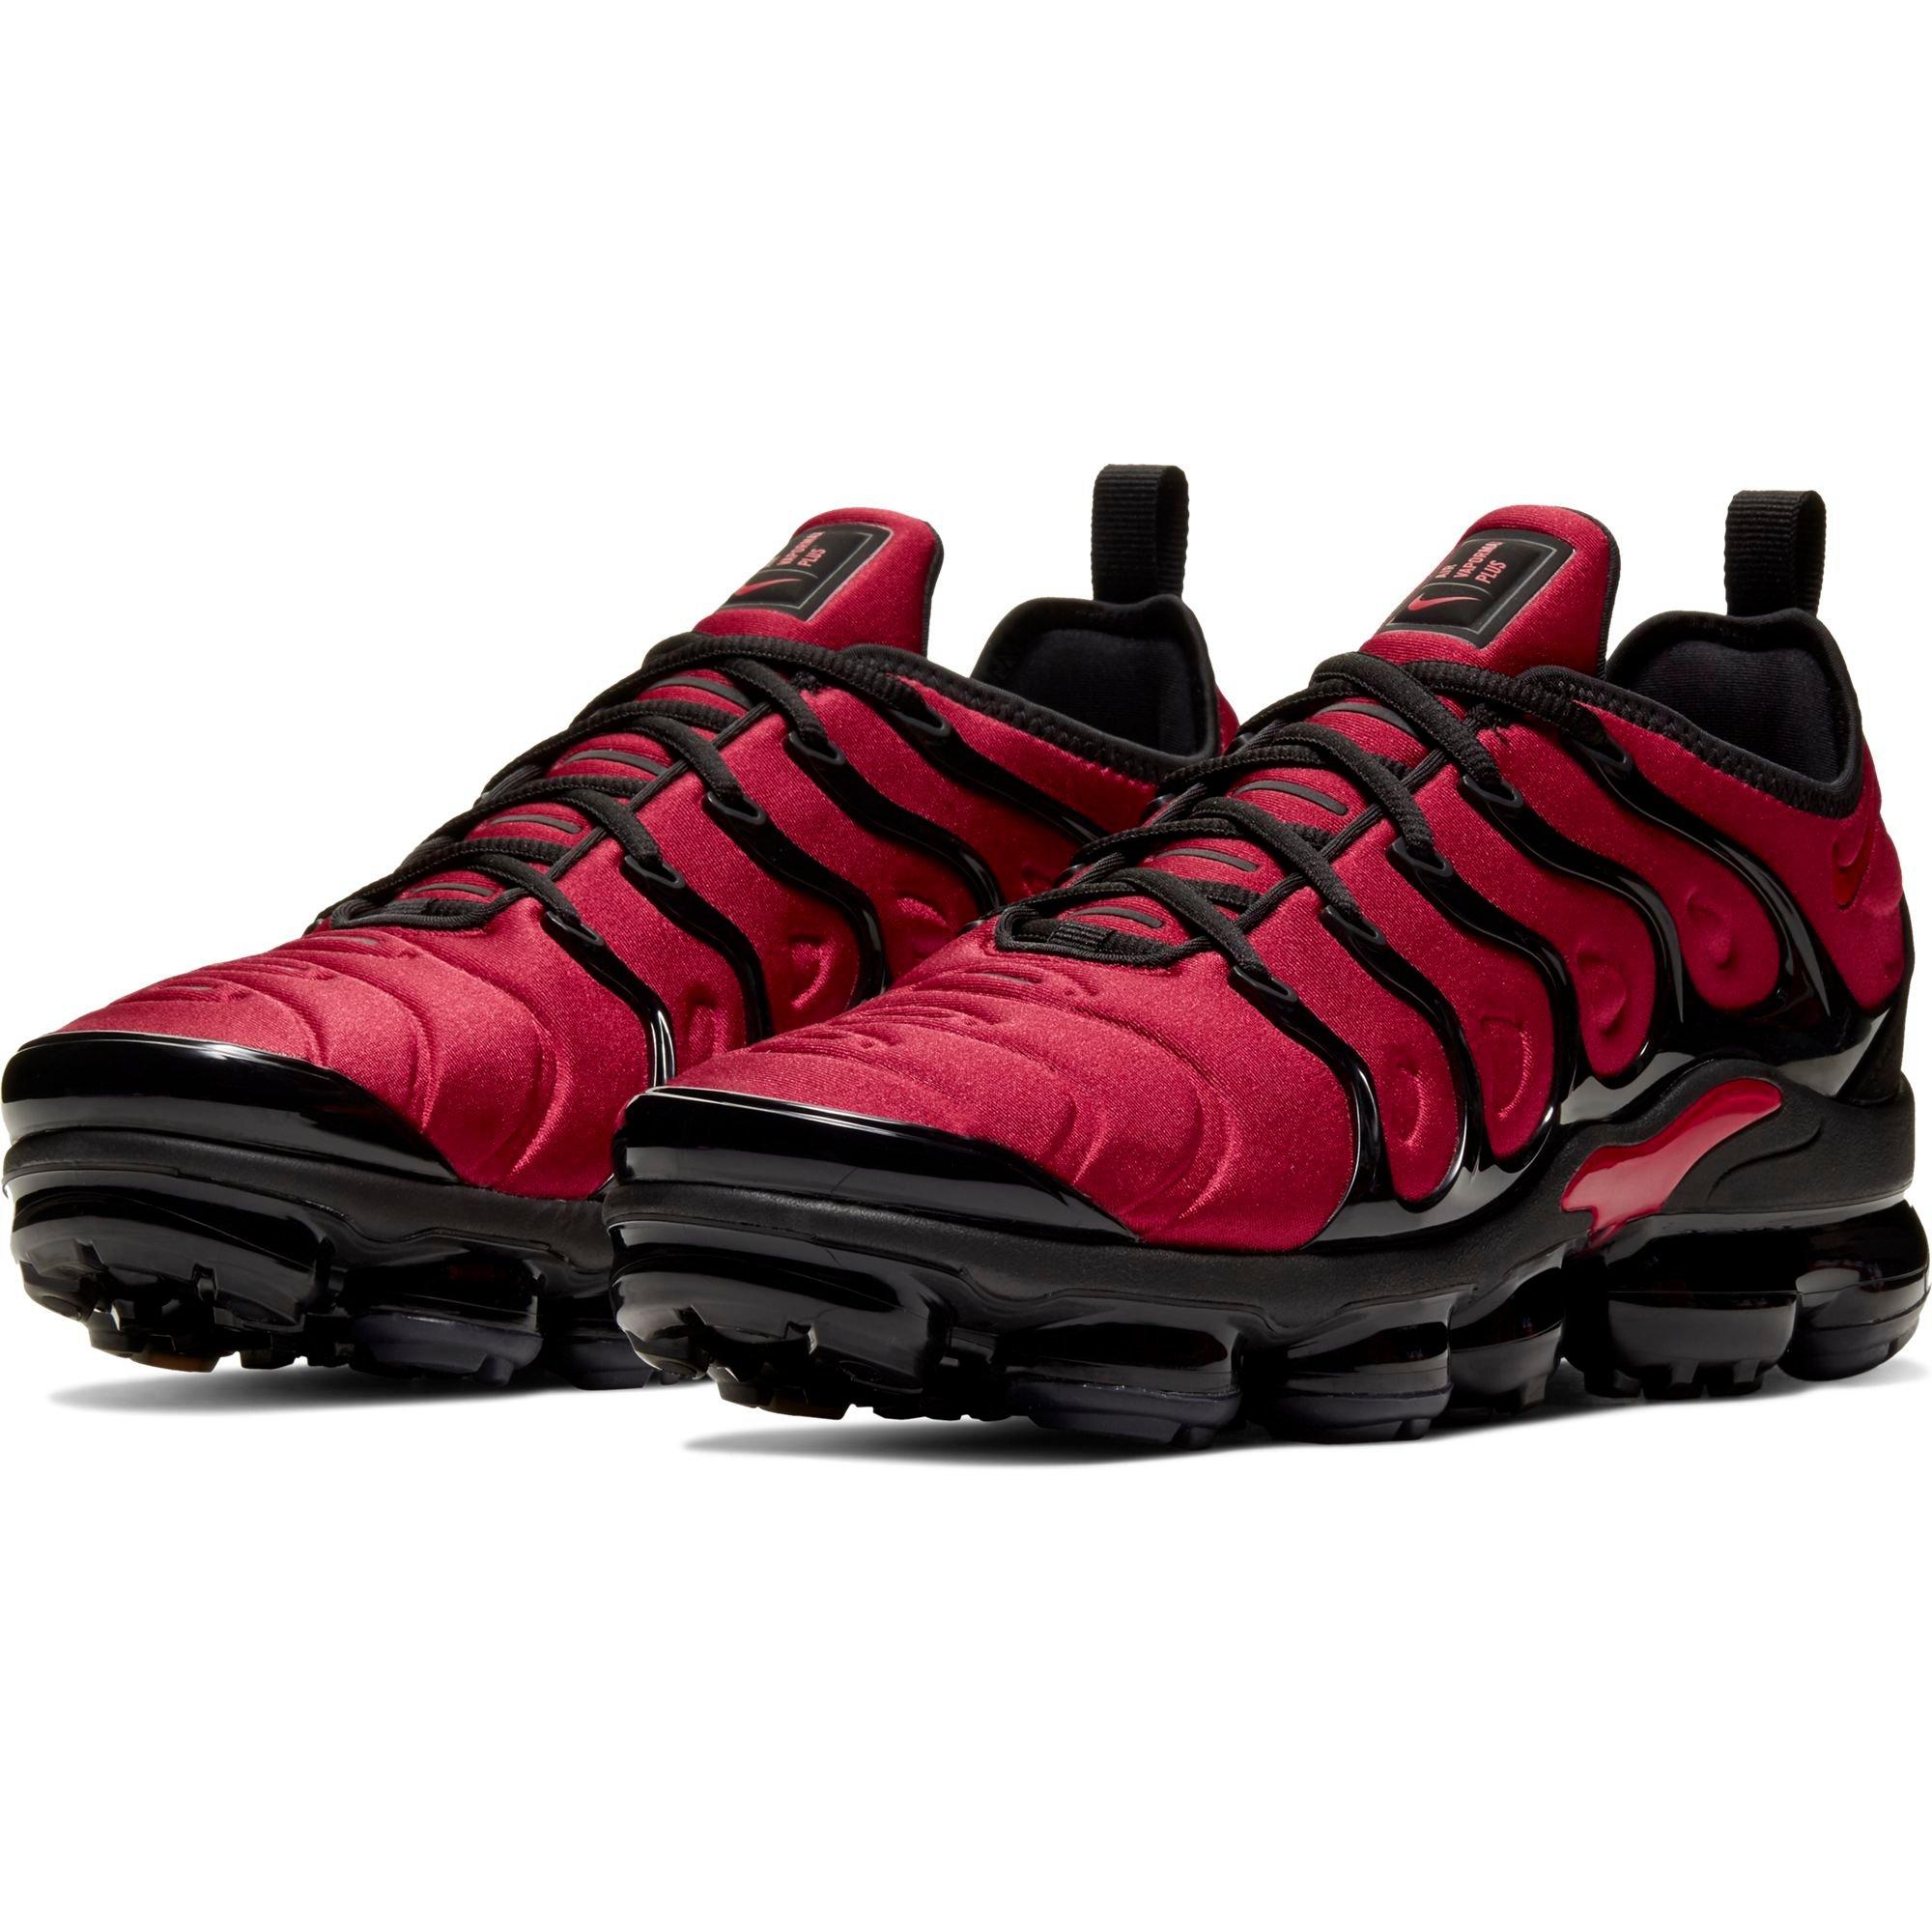 vapor max red and black